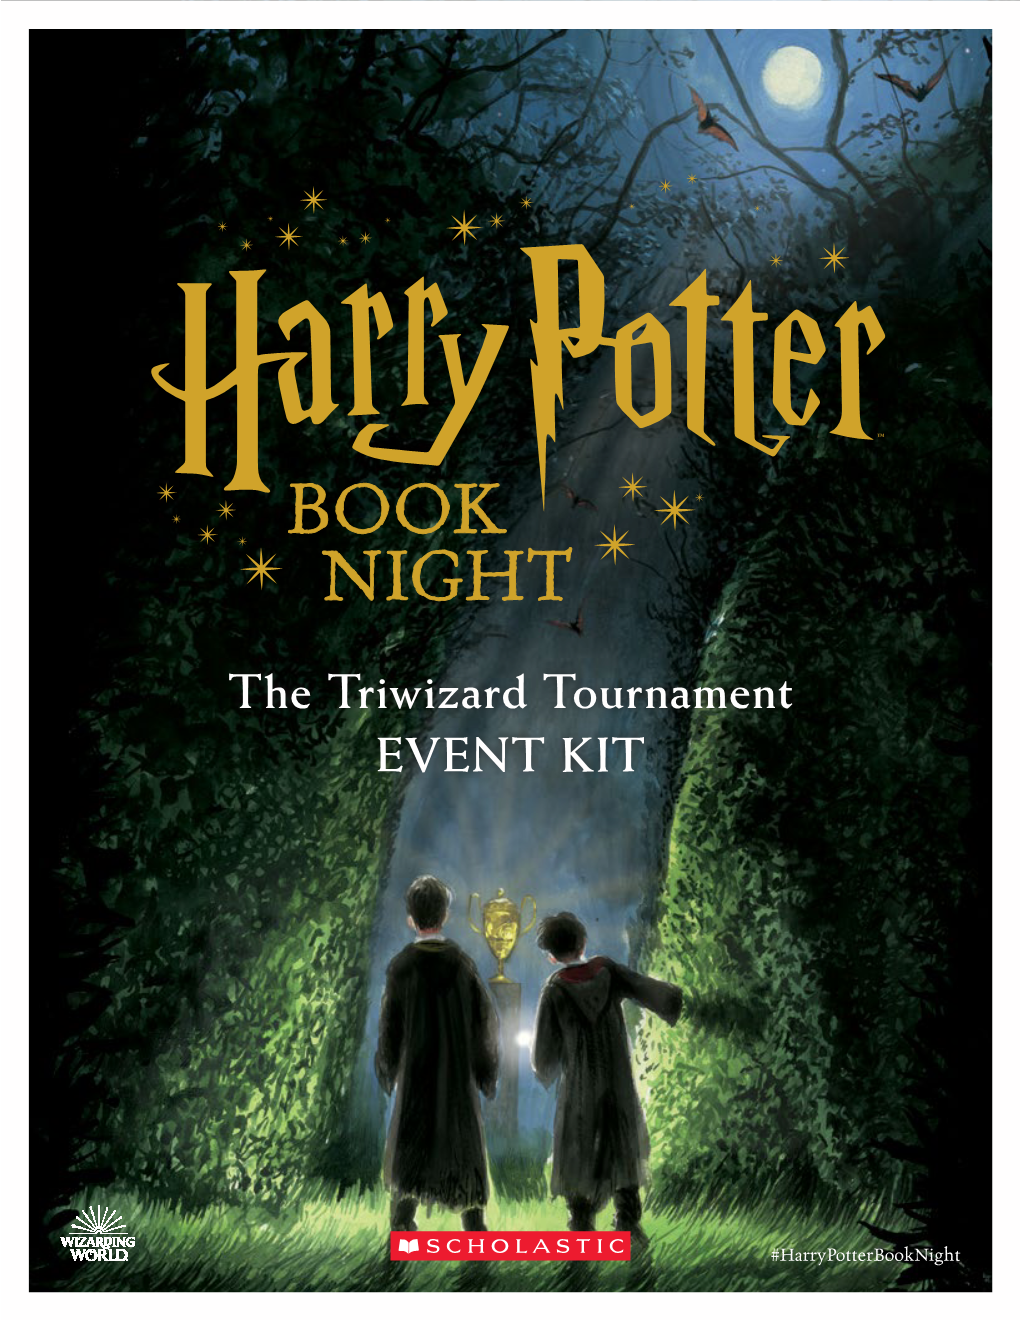 The Triwizard Tournament EVENT KIT